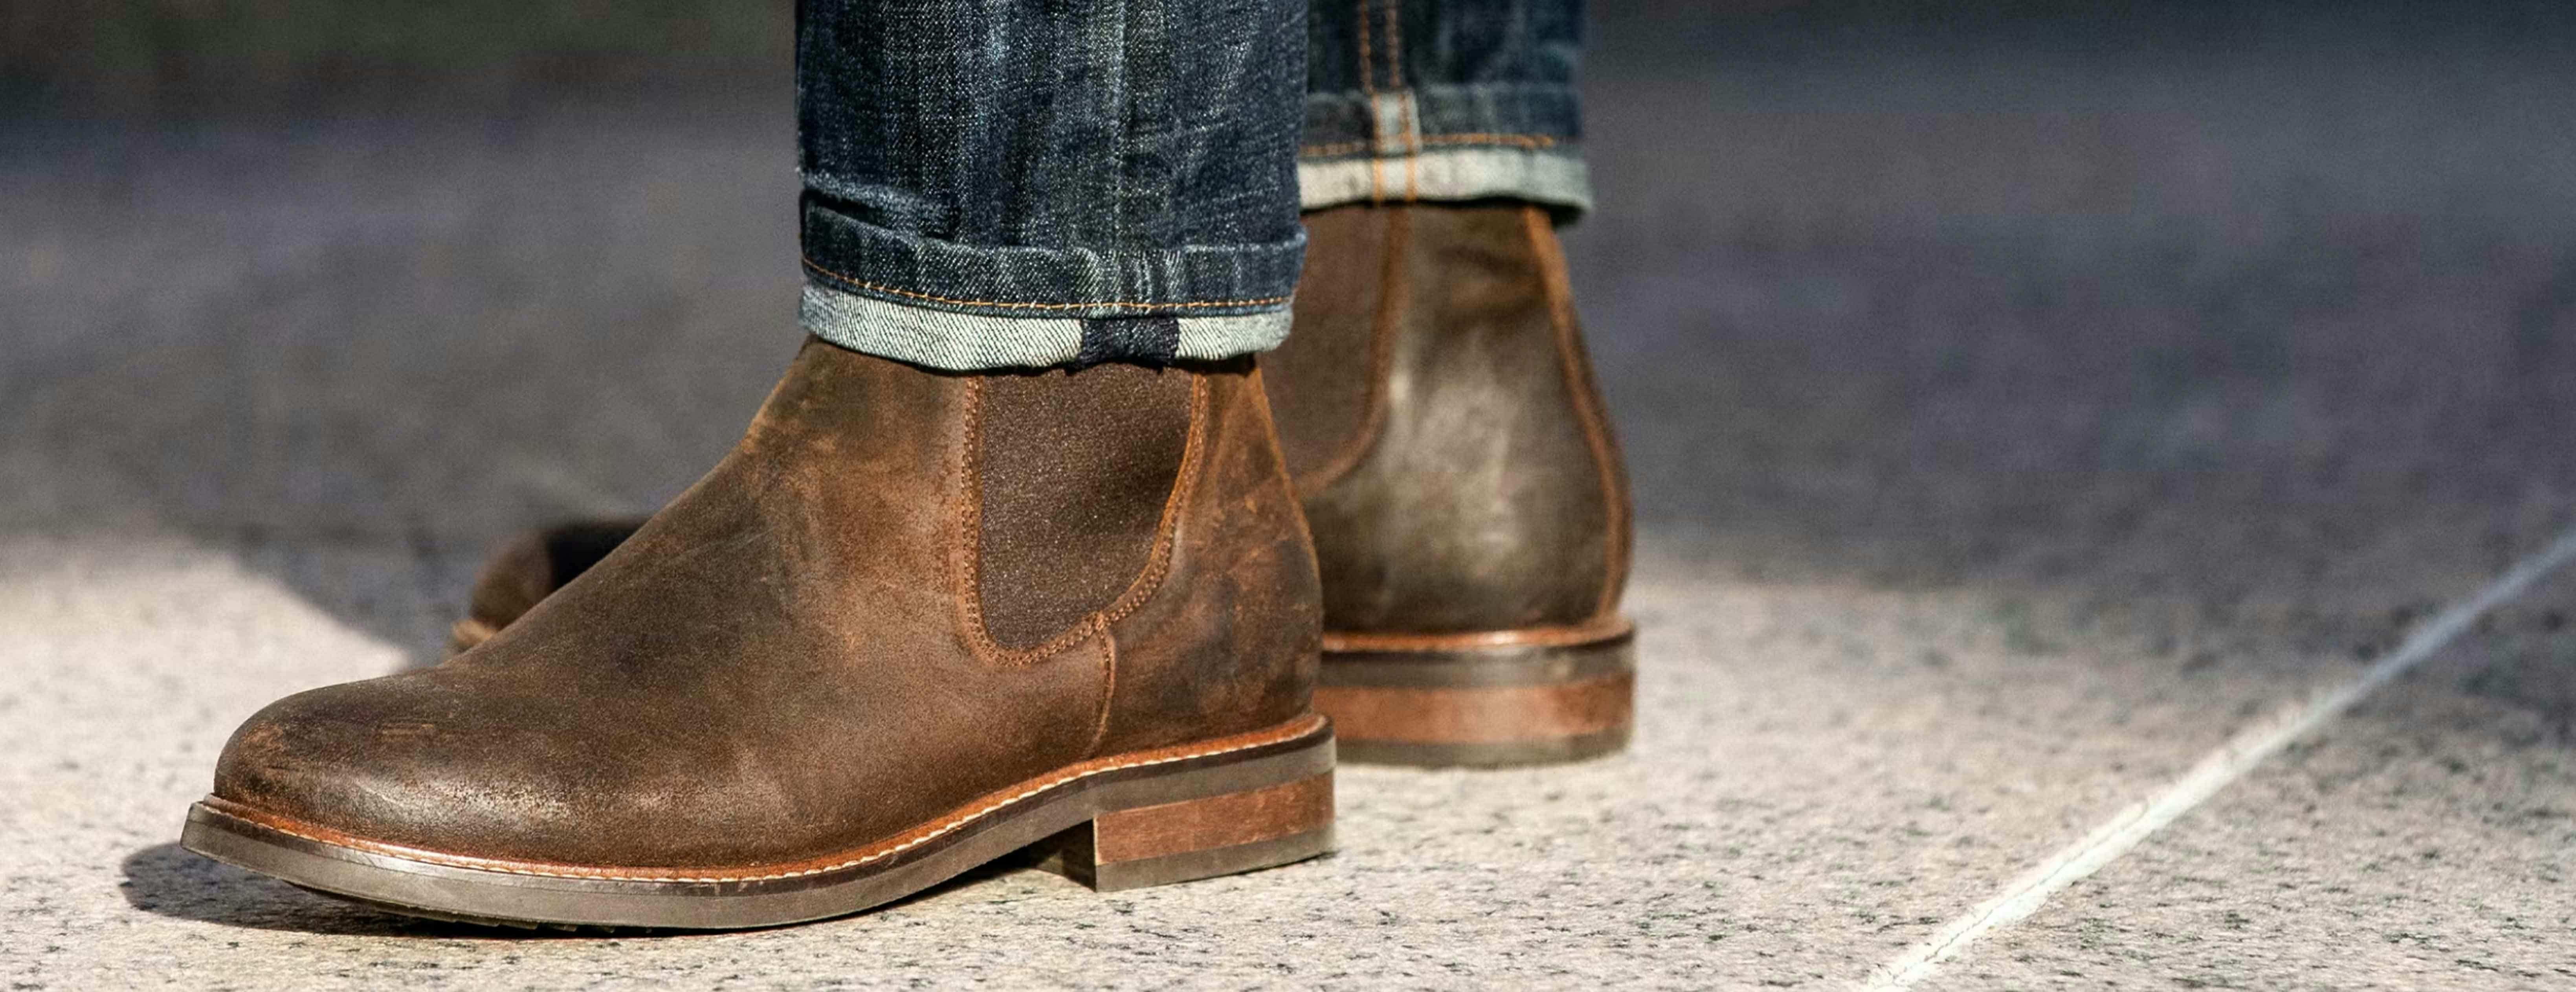 5 Coolest Ways To Style Men's Chelsea Boots With Jeans Like A Pro